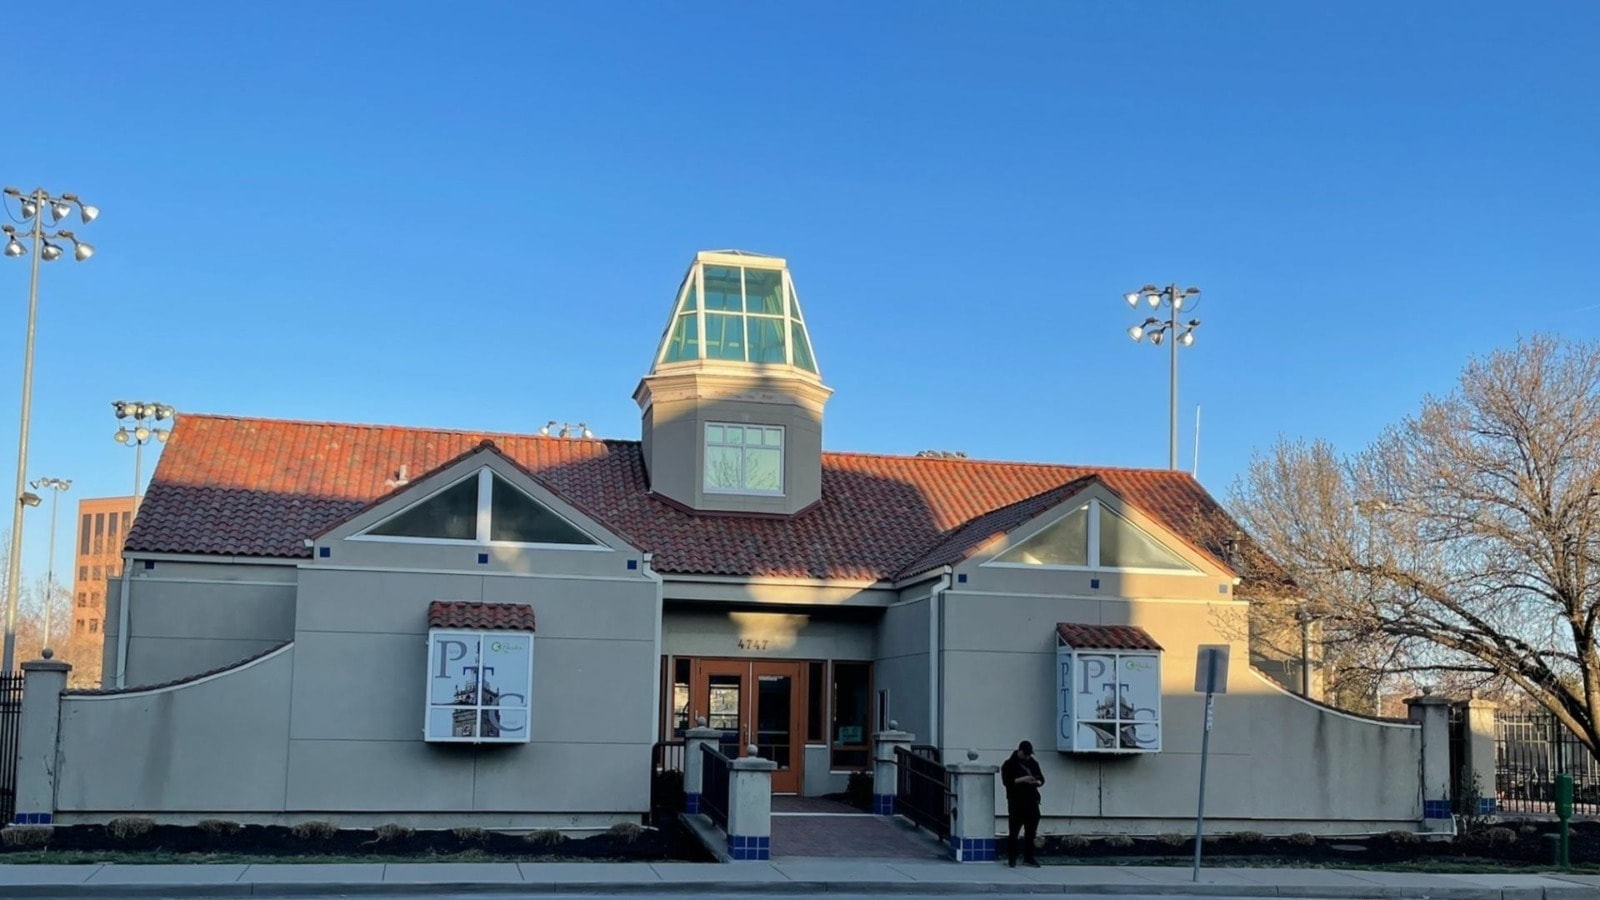 The Plaza Tennis Center clubhouse.